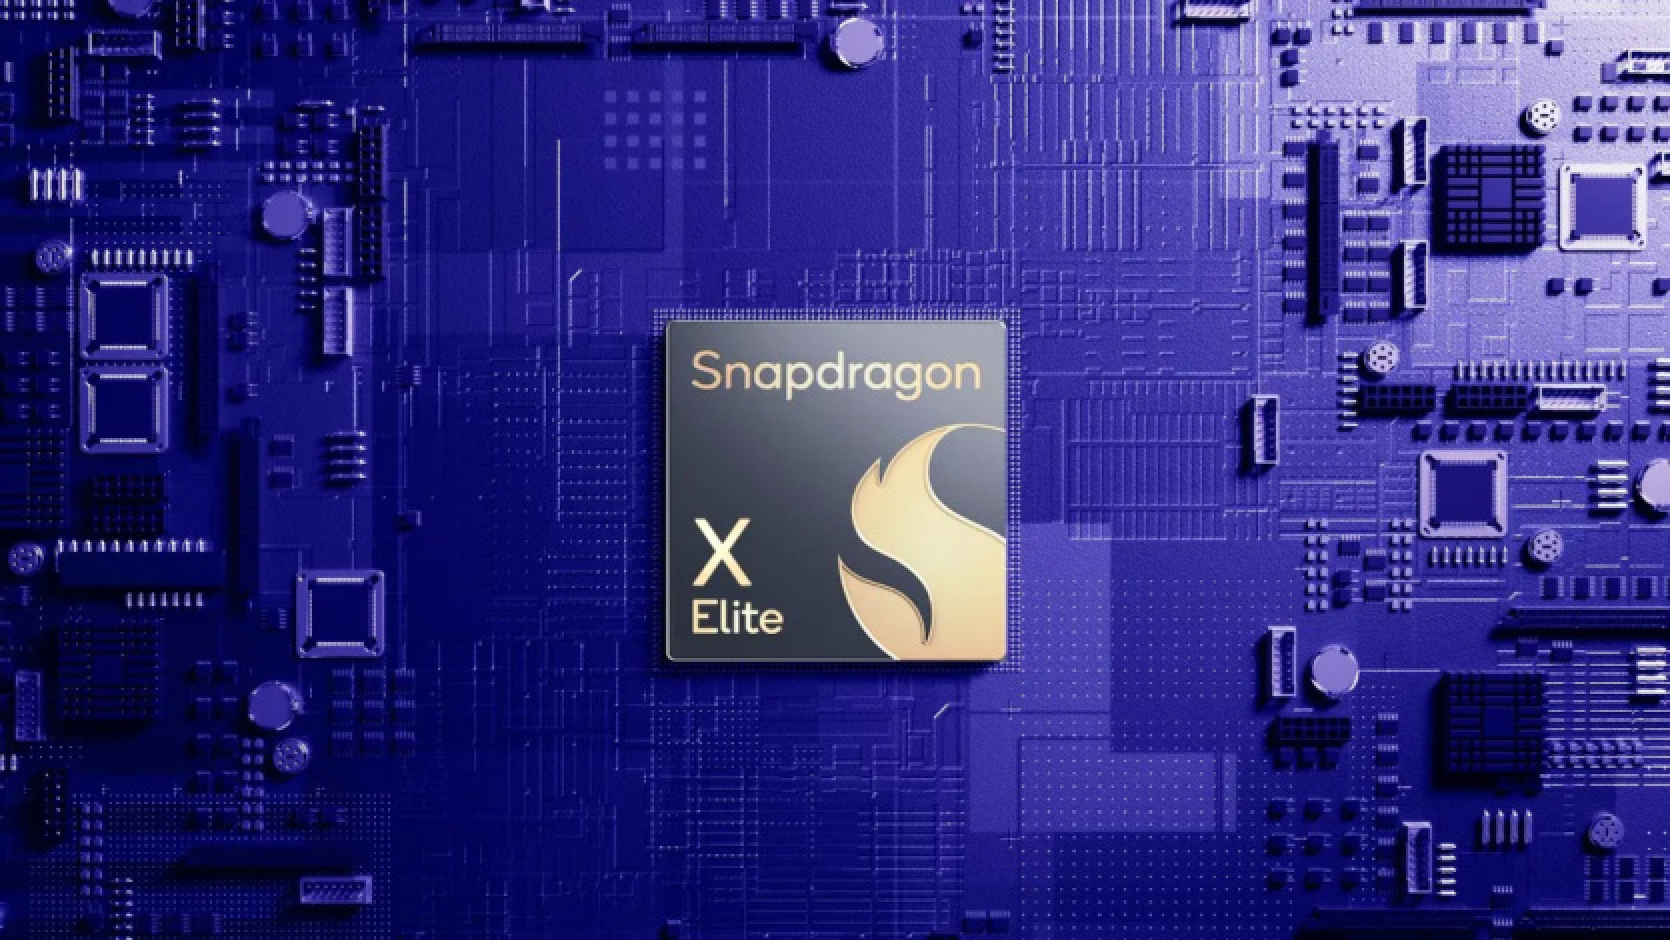 Snapdragon is coming to desktops: Qualcomm's "productive and efficient" processors will appear in all form factors